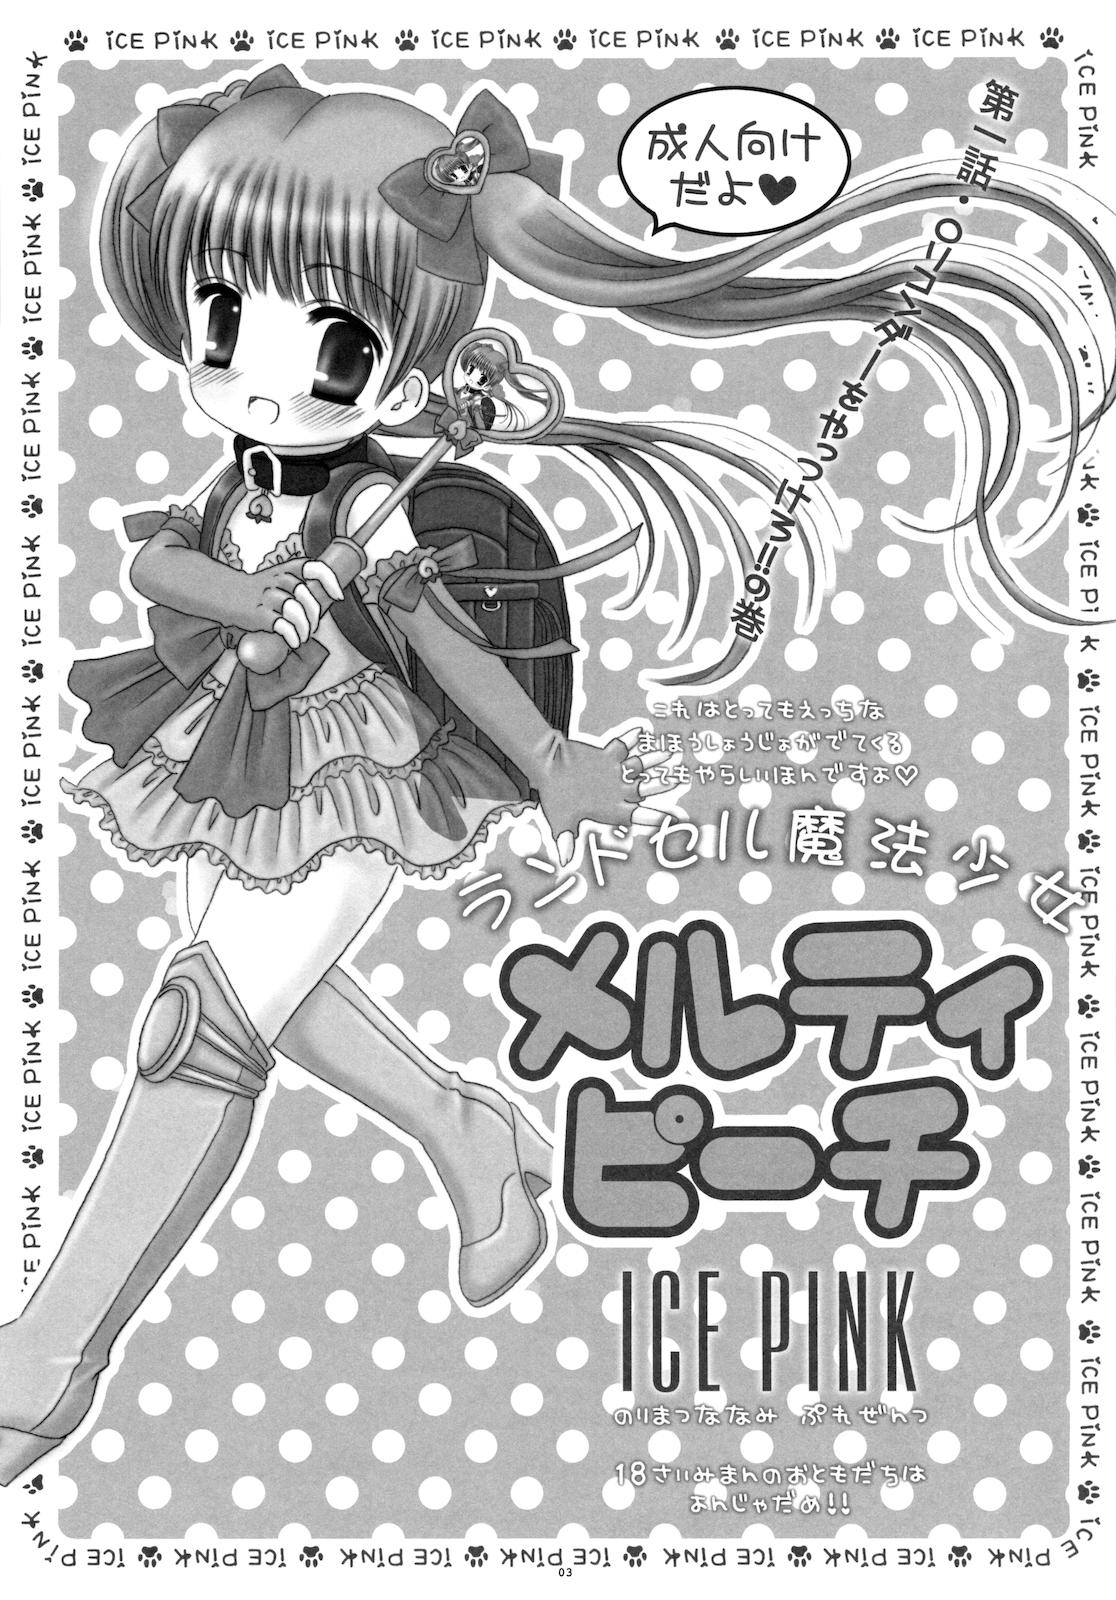 Sex Pussy Round Shell Mahou Shoujo Melty Peach Show - Page 5